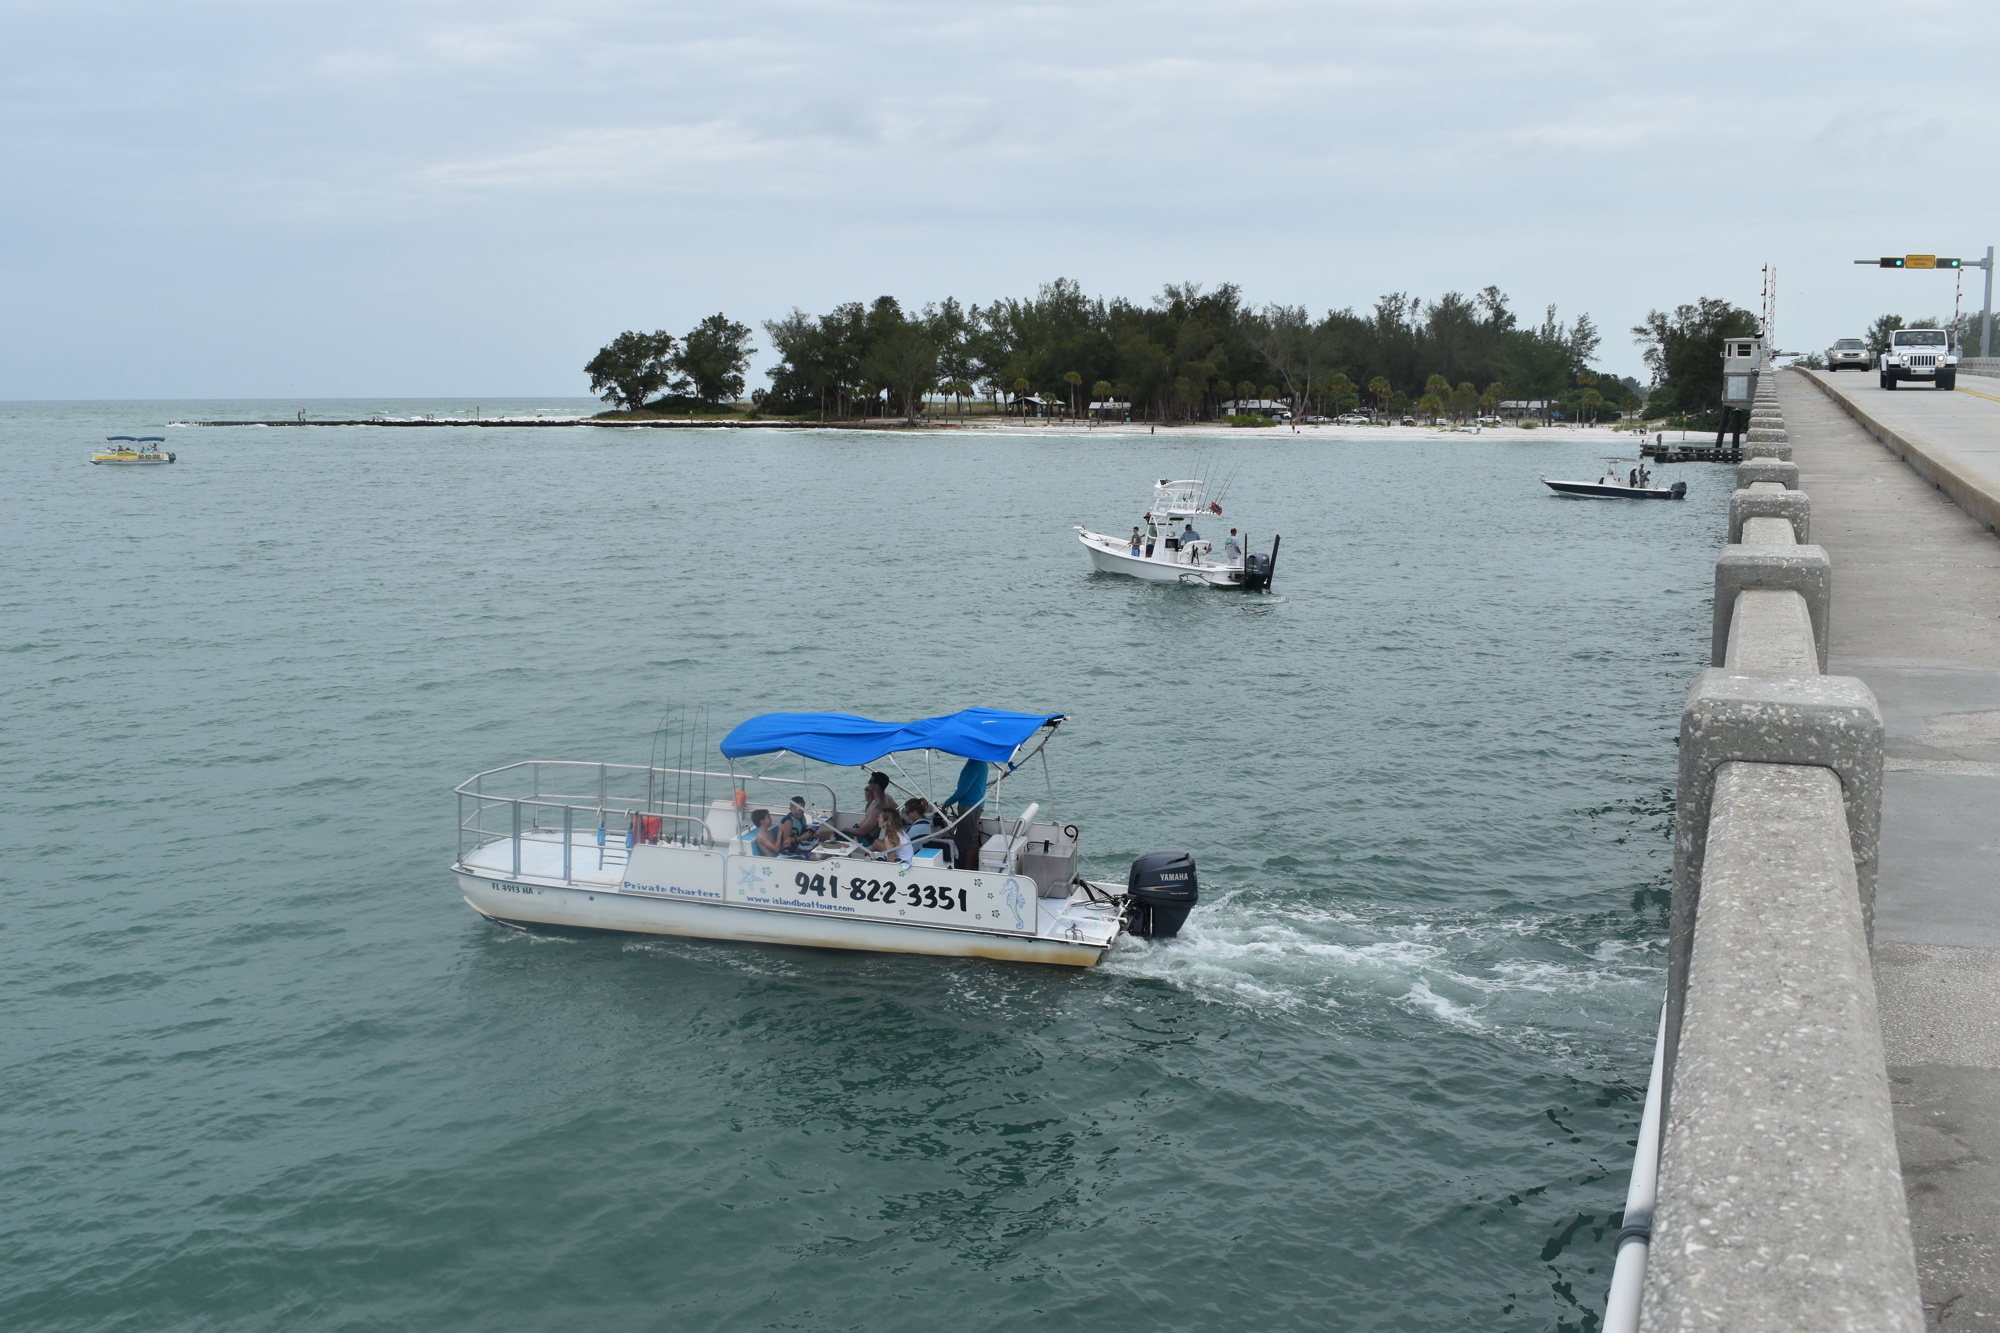 Boats navigated the water on June 16 near the Longboat Pass Bridge.